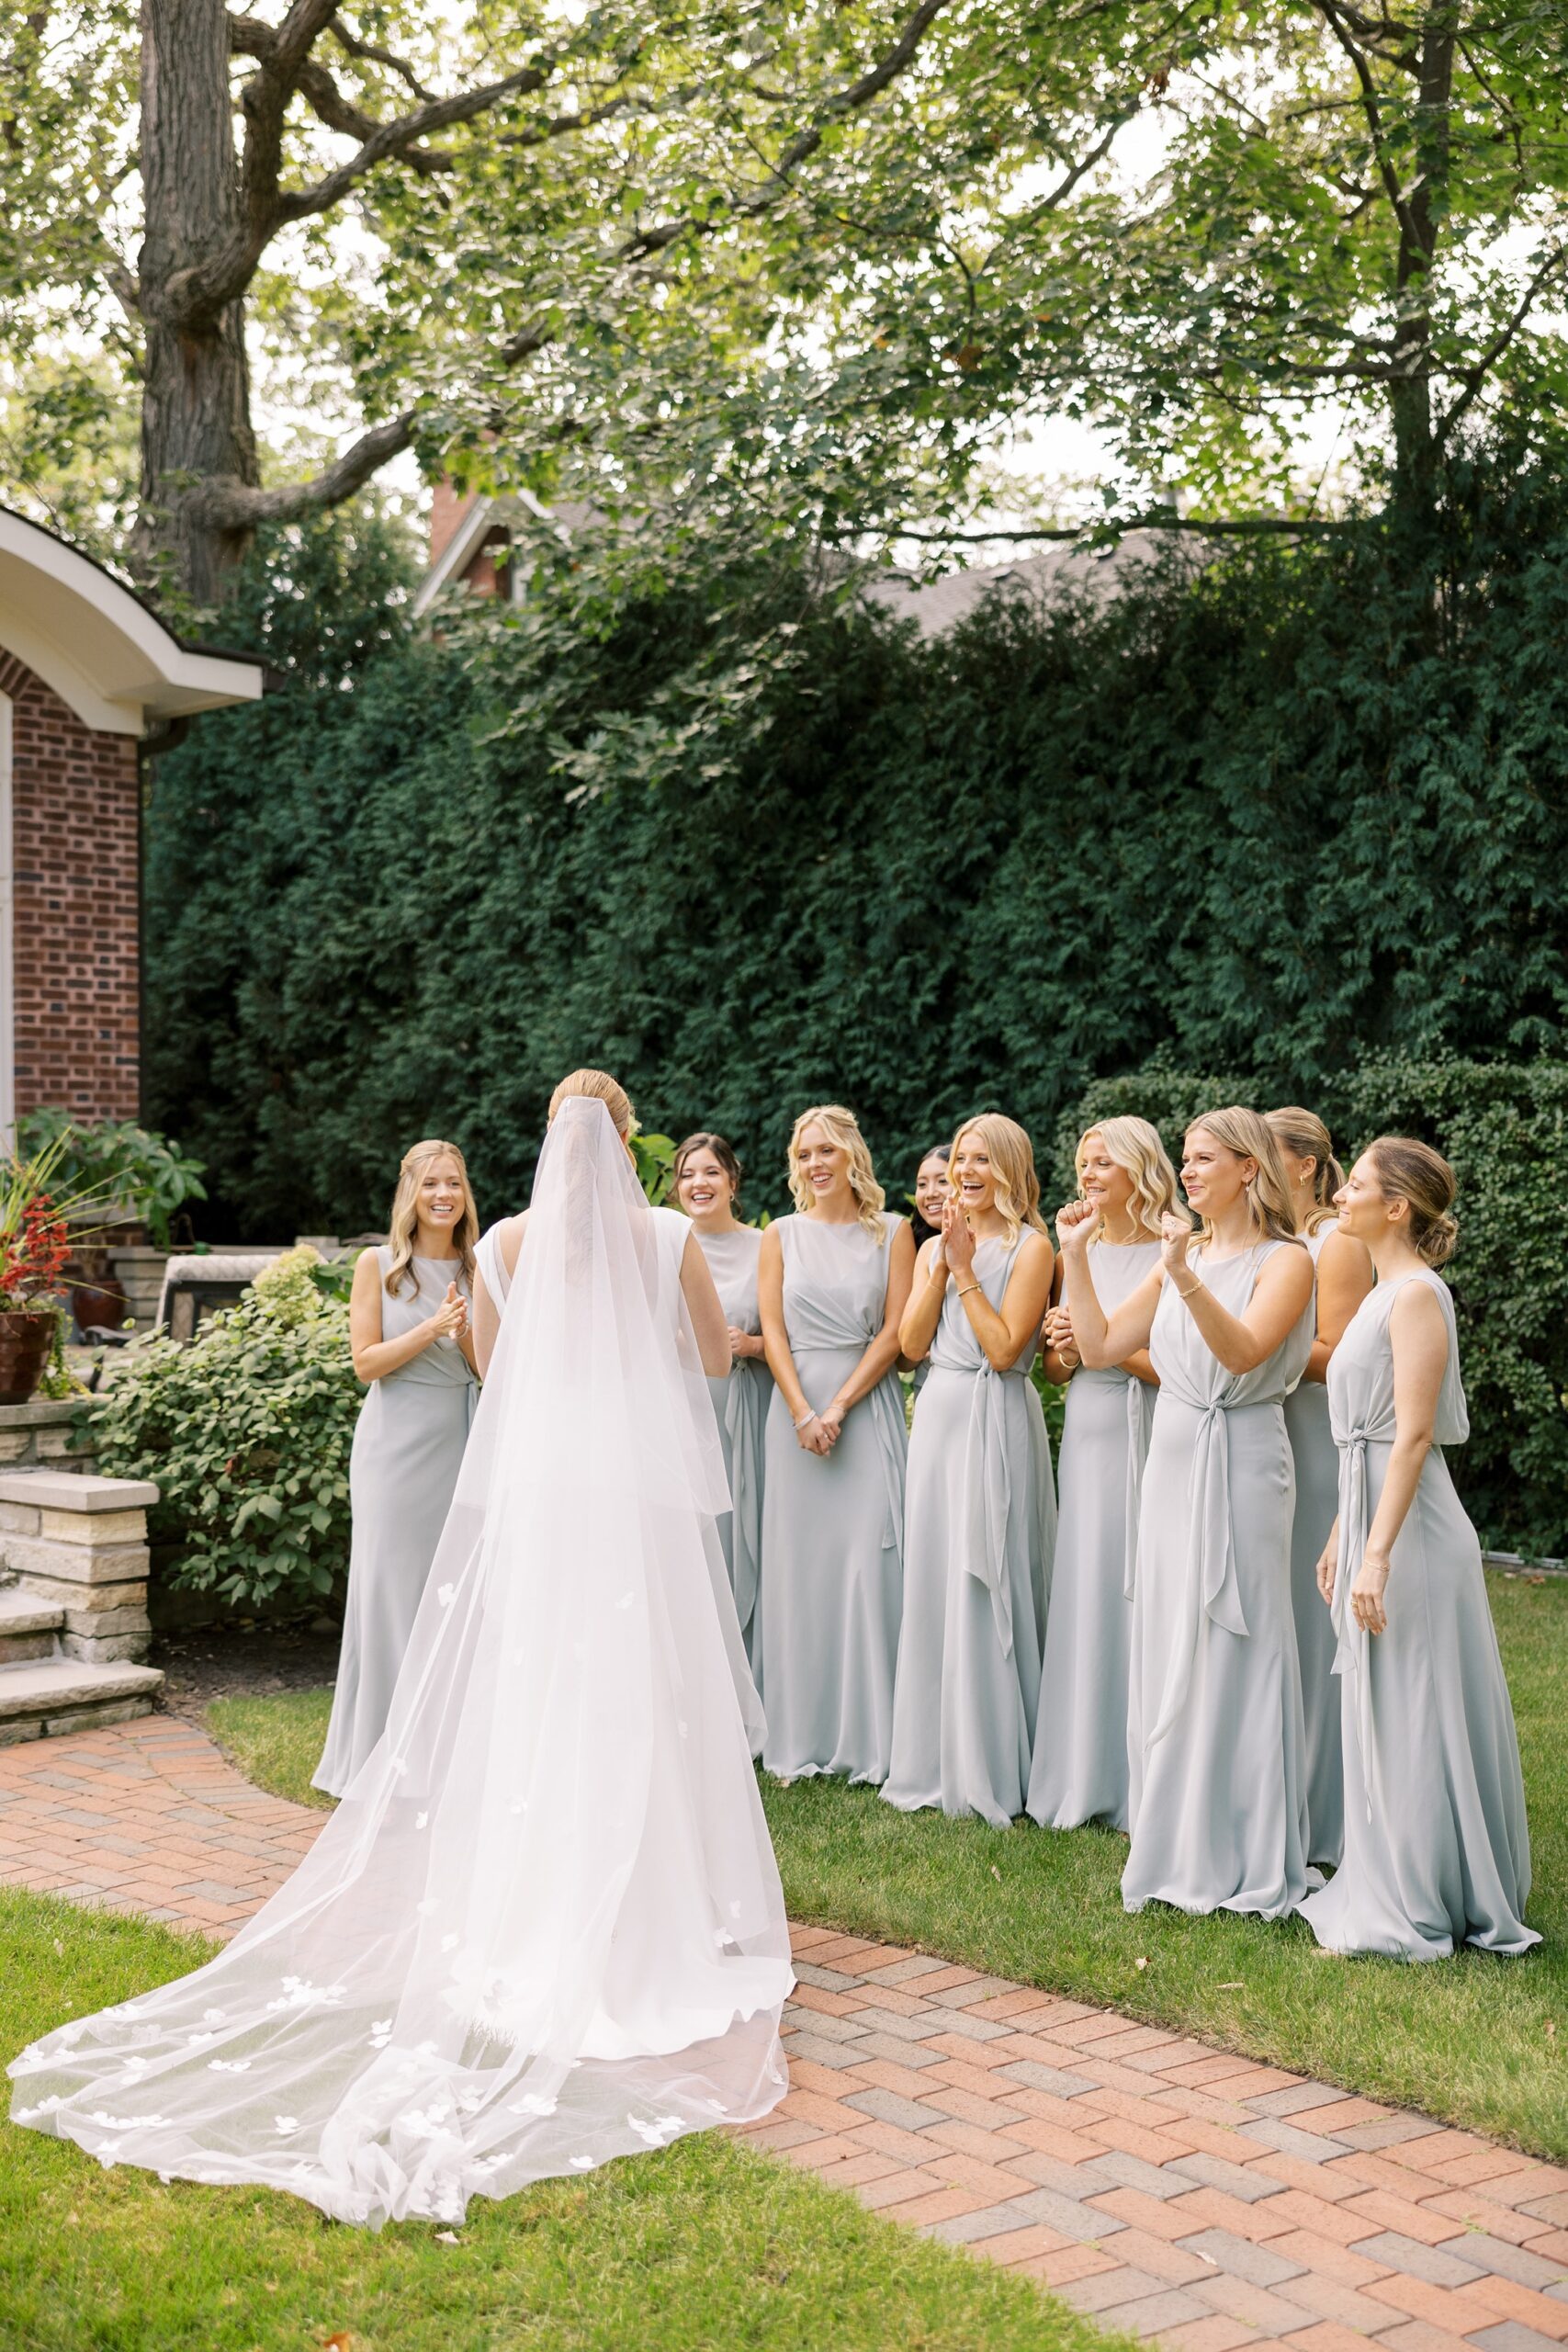 The bridesmaids enjoyed seeing their bride before the. Westmoreland Country Club wedding